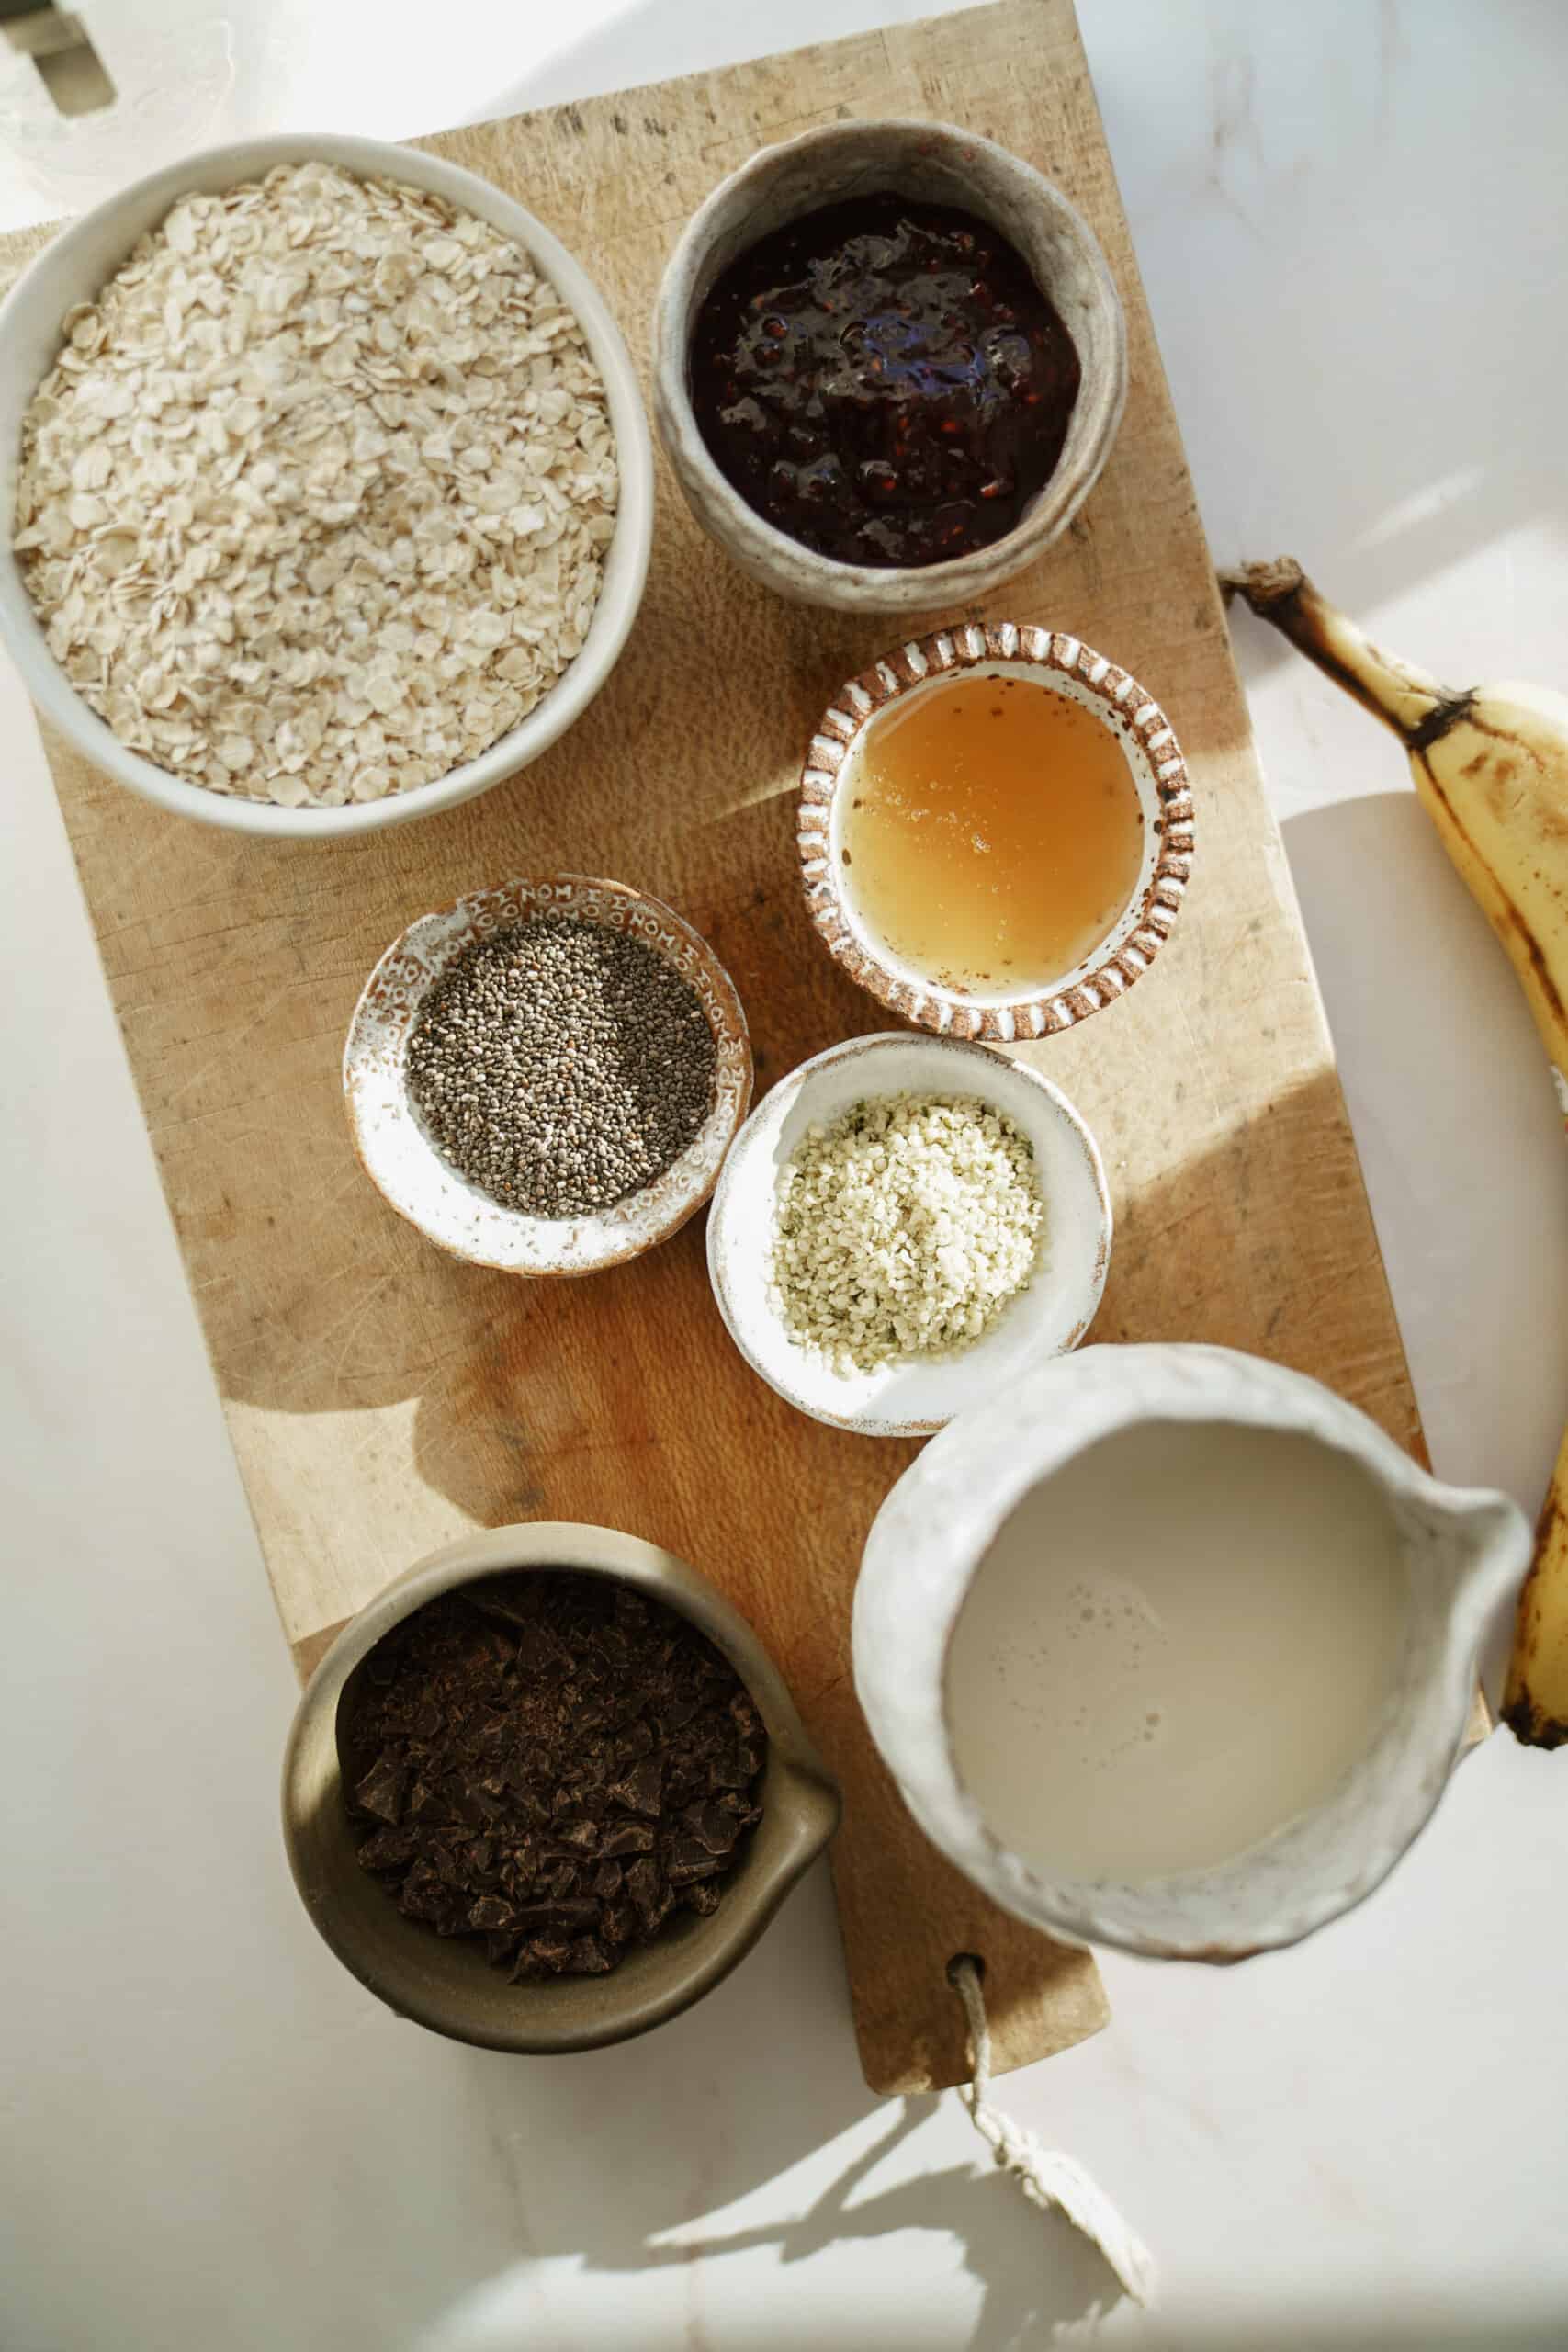 Ingredients you'll need before I show you how to make overnight oats